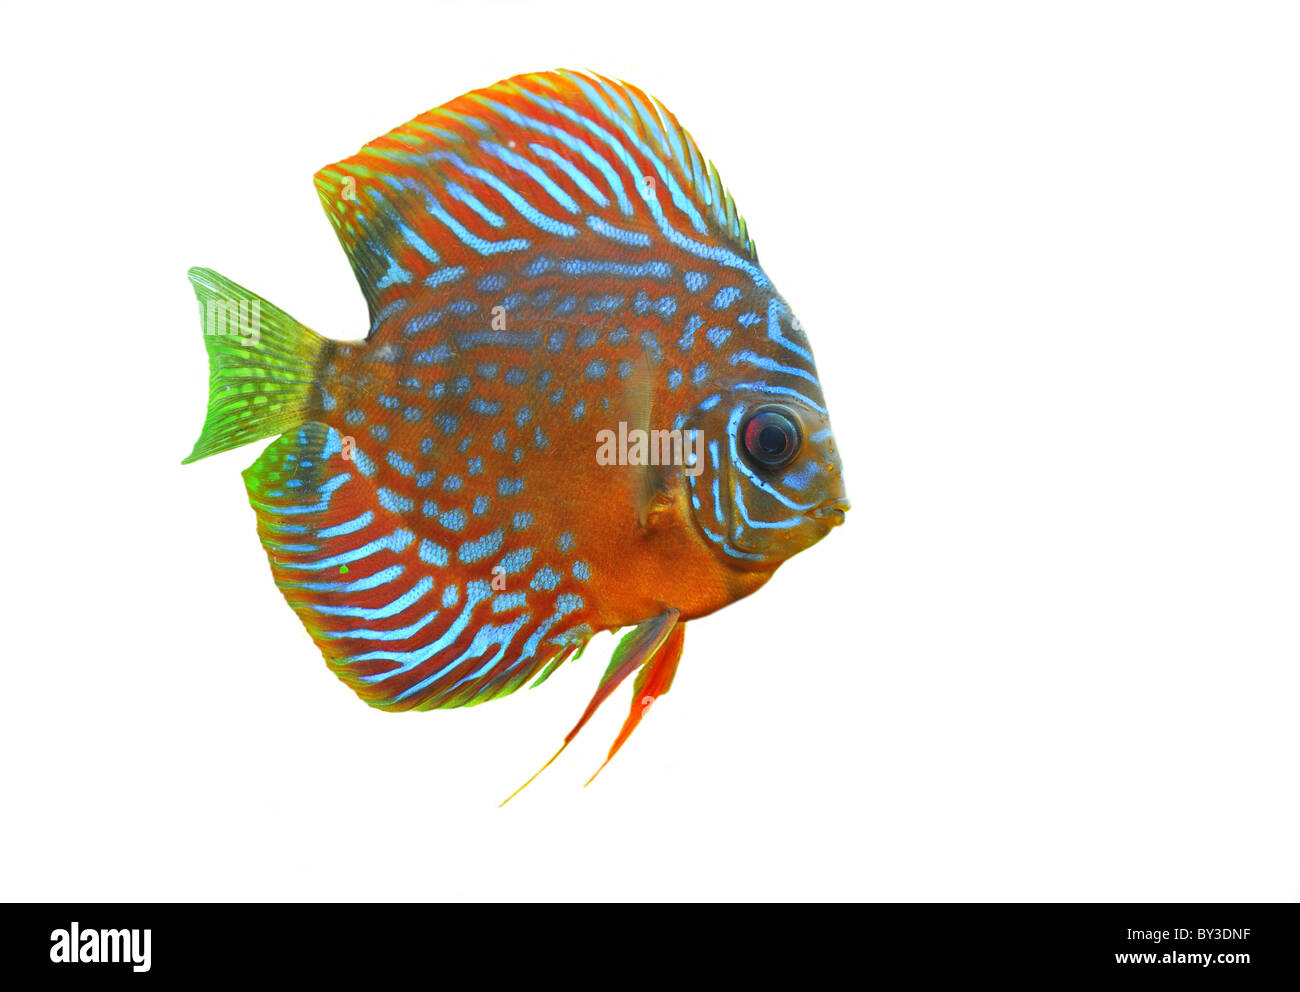 portrait of a blue tropical Symphysodon discus fish in a white background Stock Photo